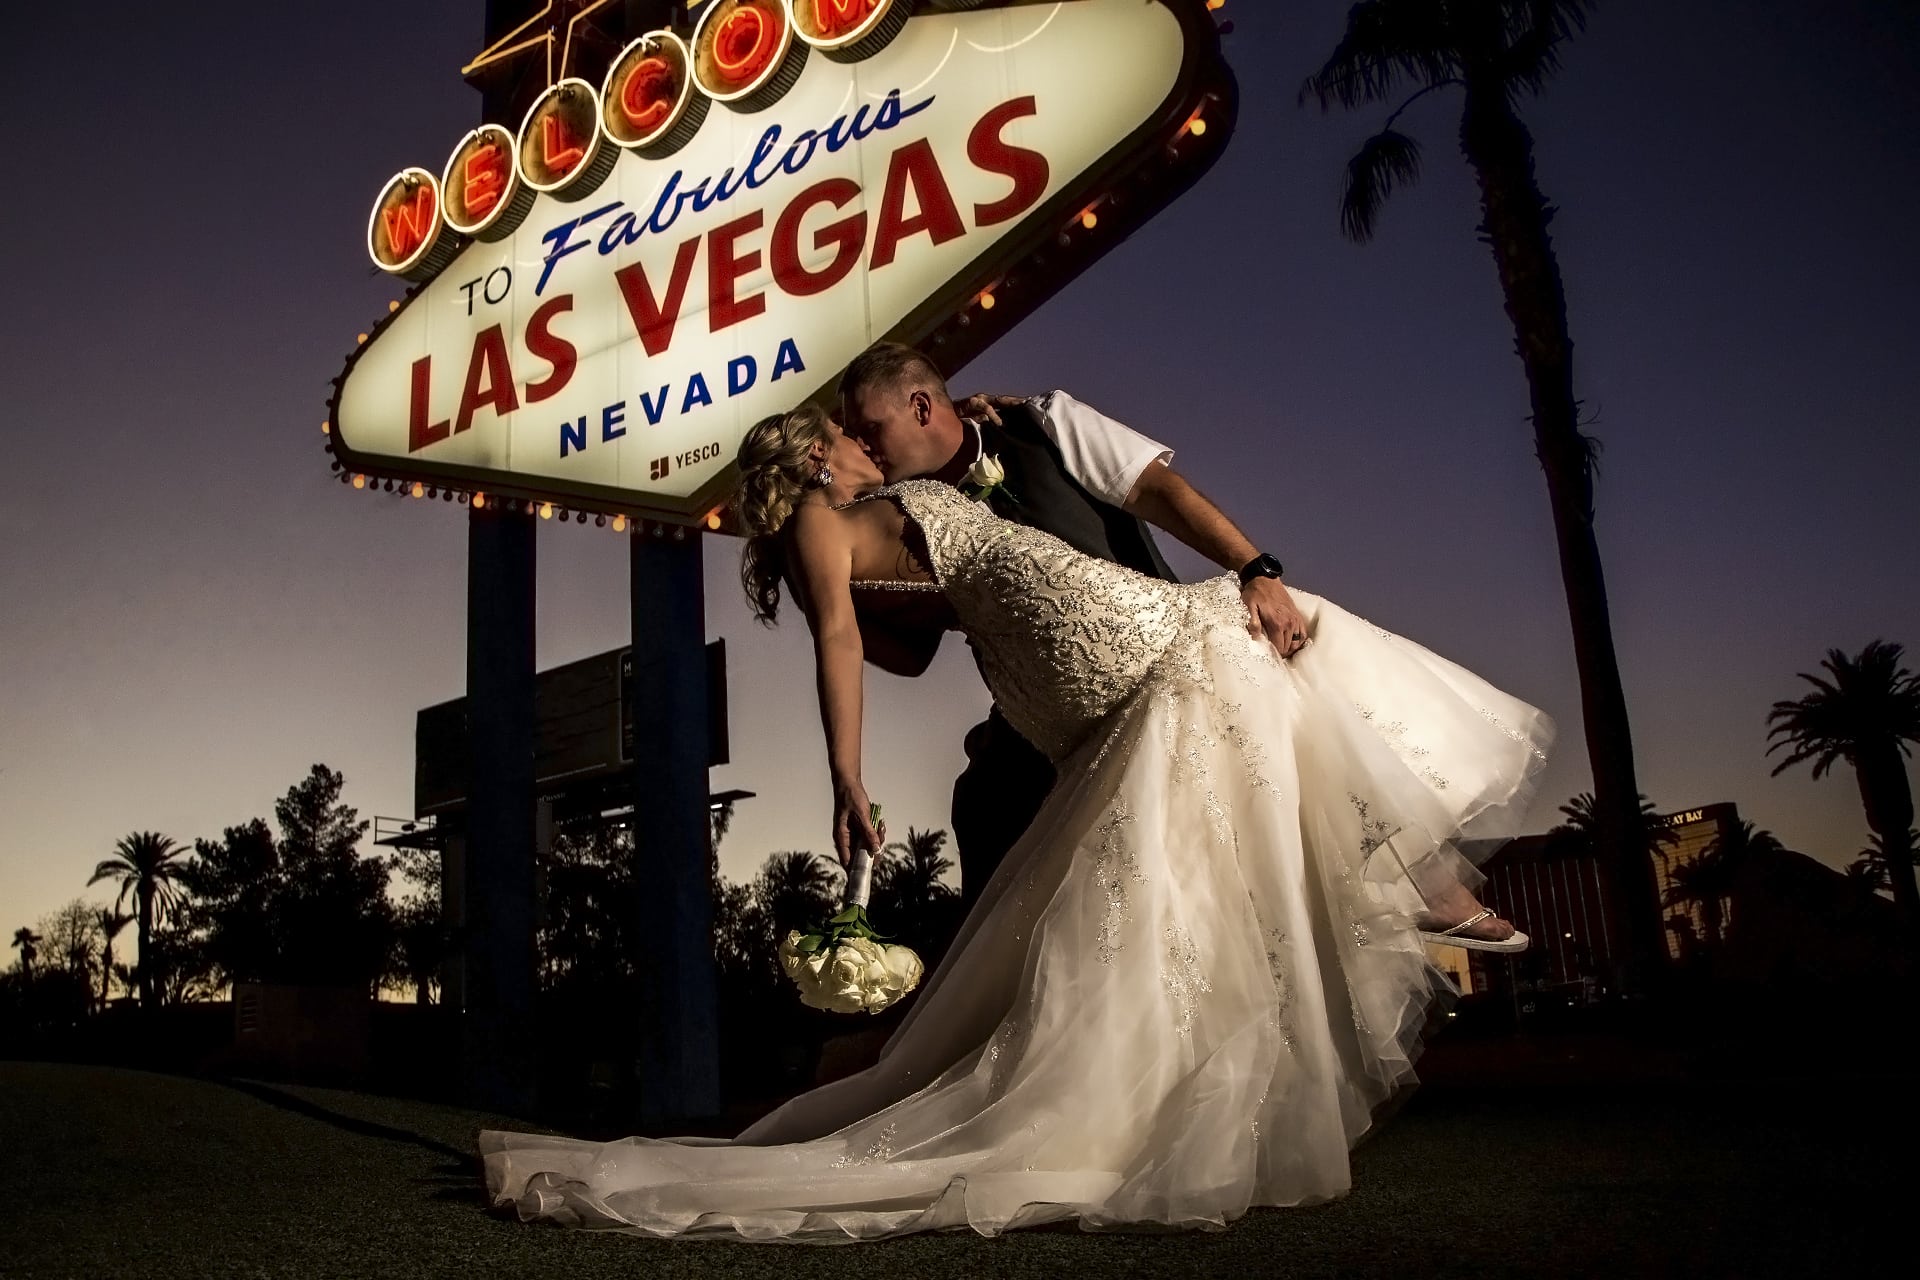 A bride and groom kiss in front of the las vegas sign.